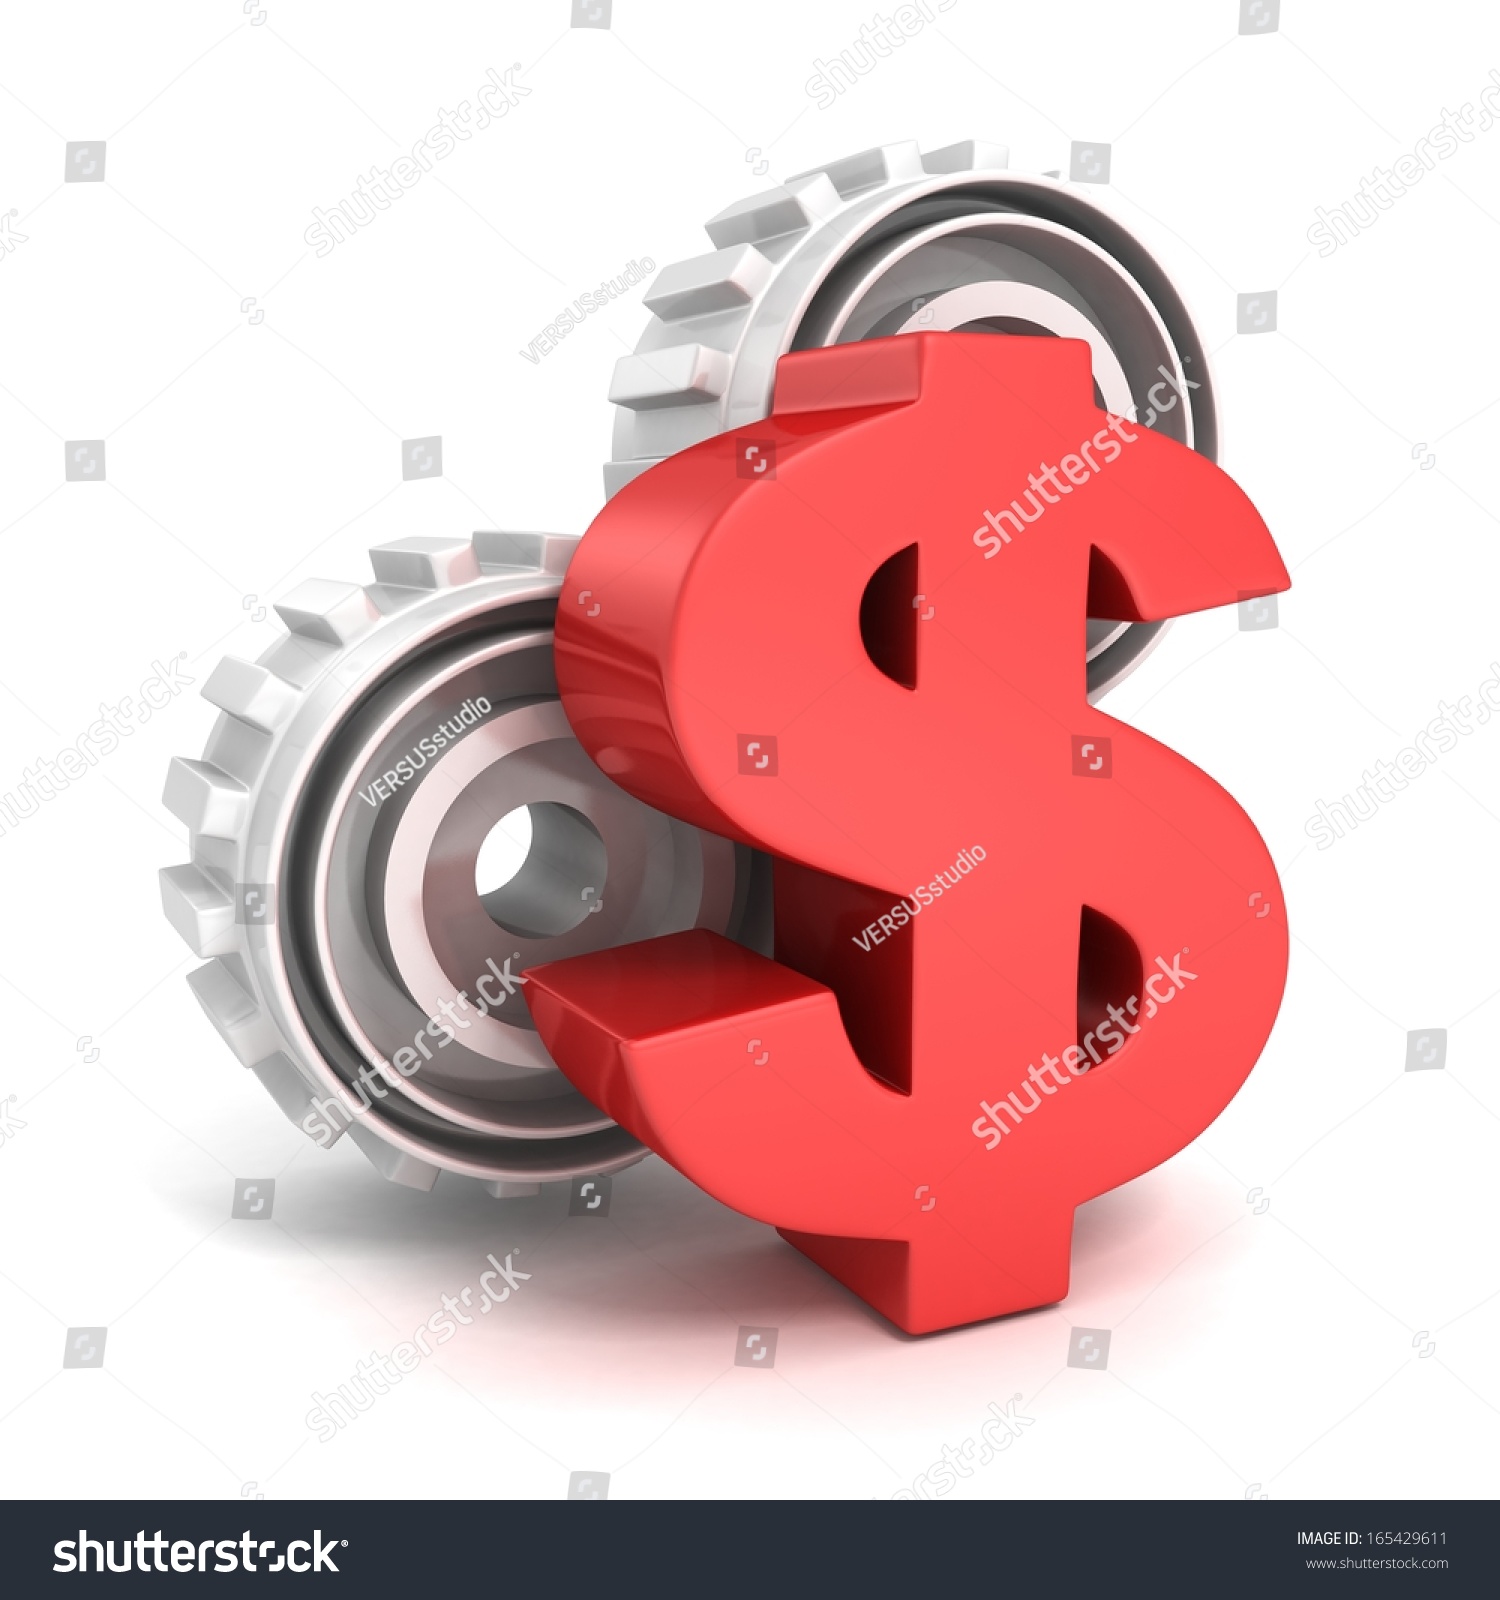 Concept Red Dollar Currency Symbol Work Stock Illustration 165429611 ...